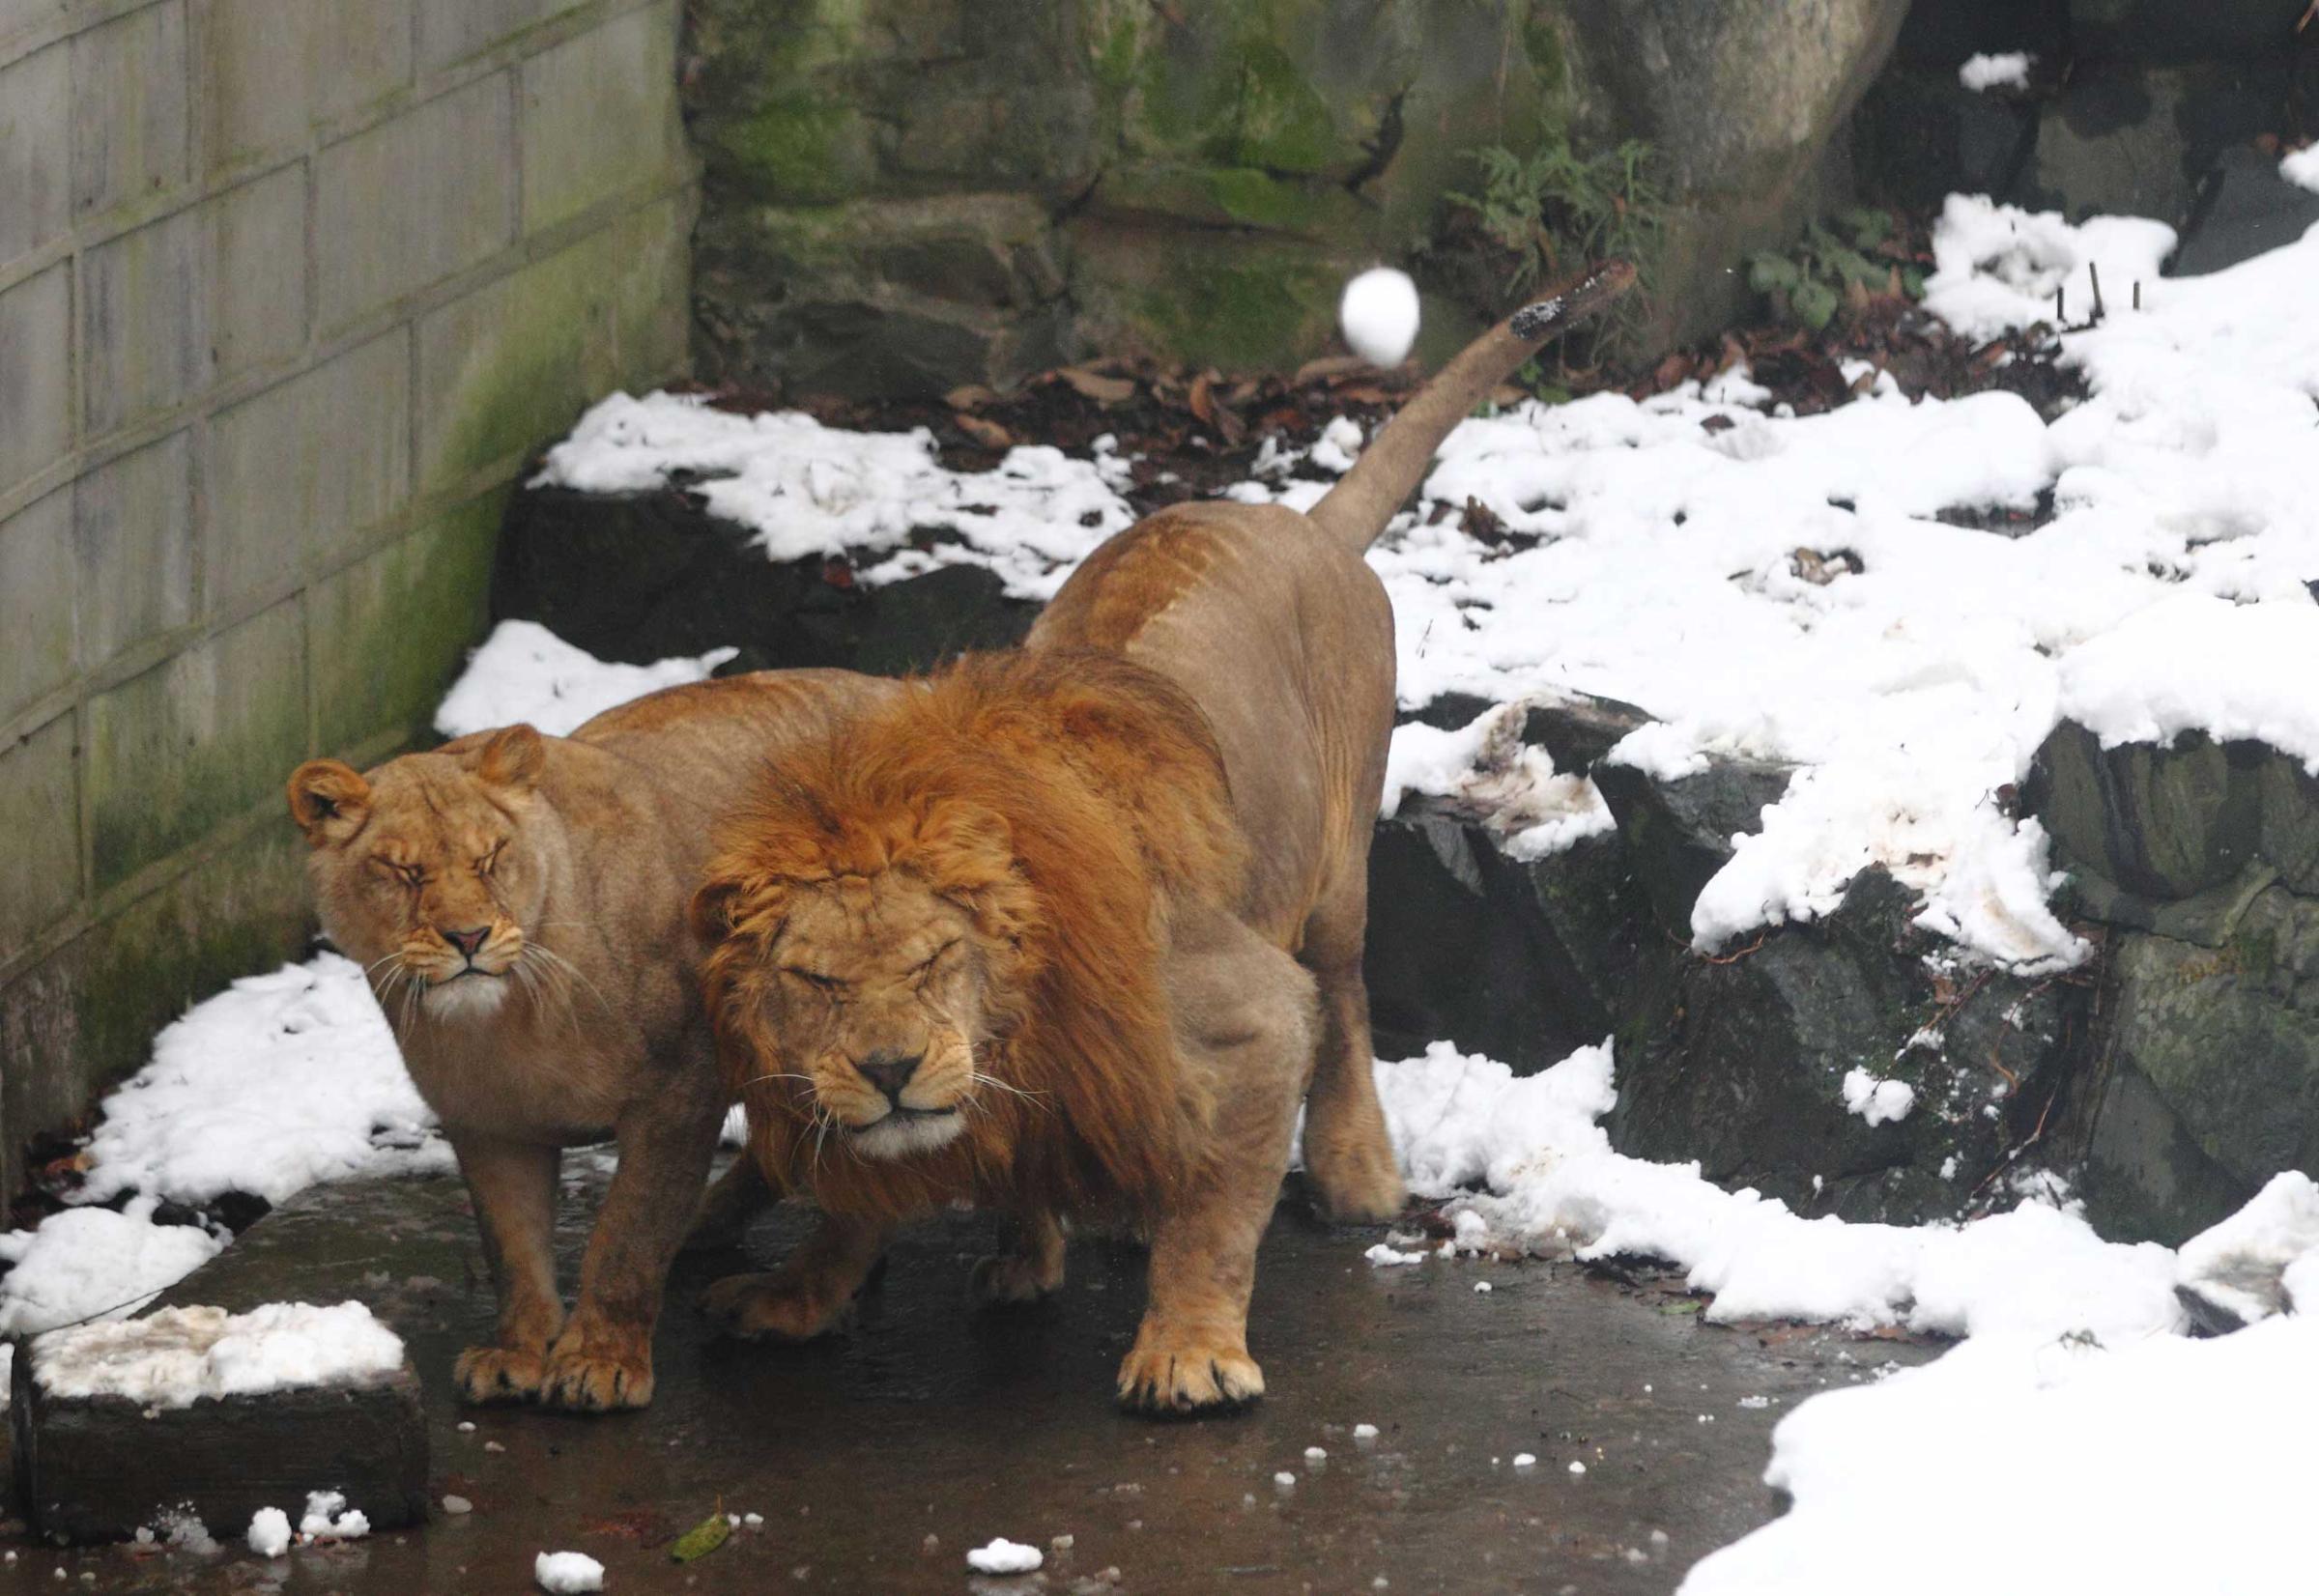 Lions in their enclosure react as tourists throw snowballs at them in the Hangzhou Zoo in Hangzhou, China on Jan. 6, 2013.